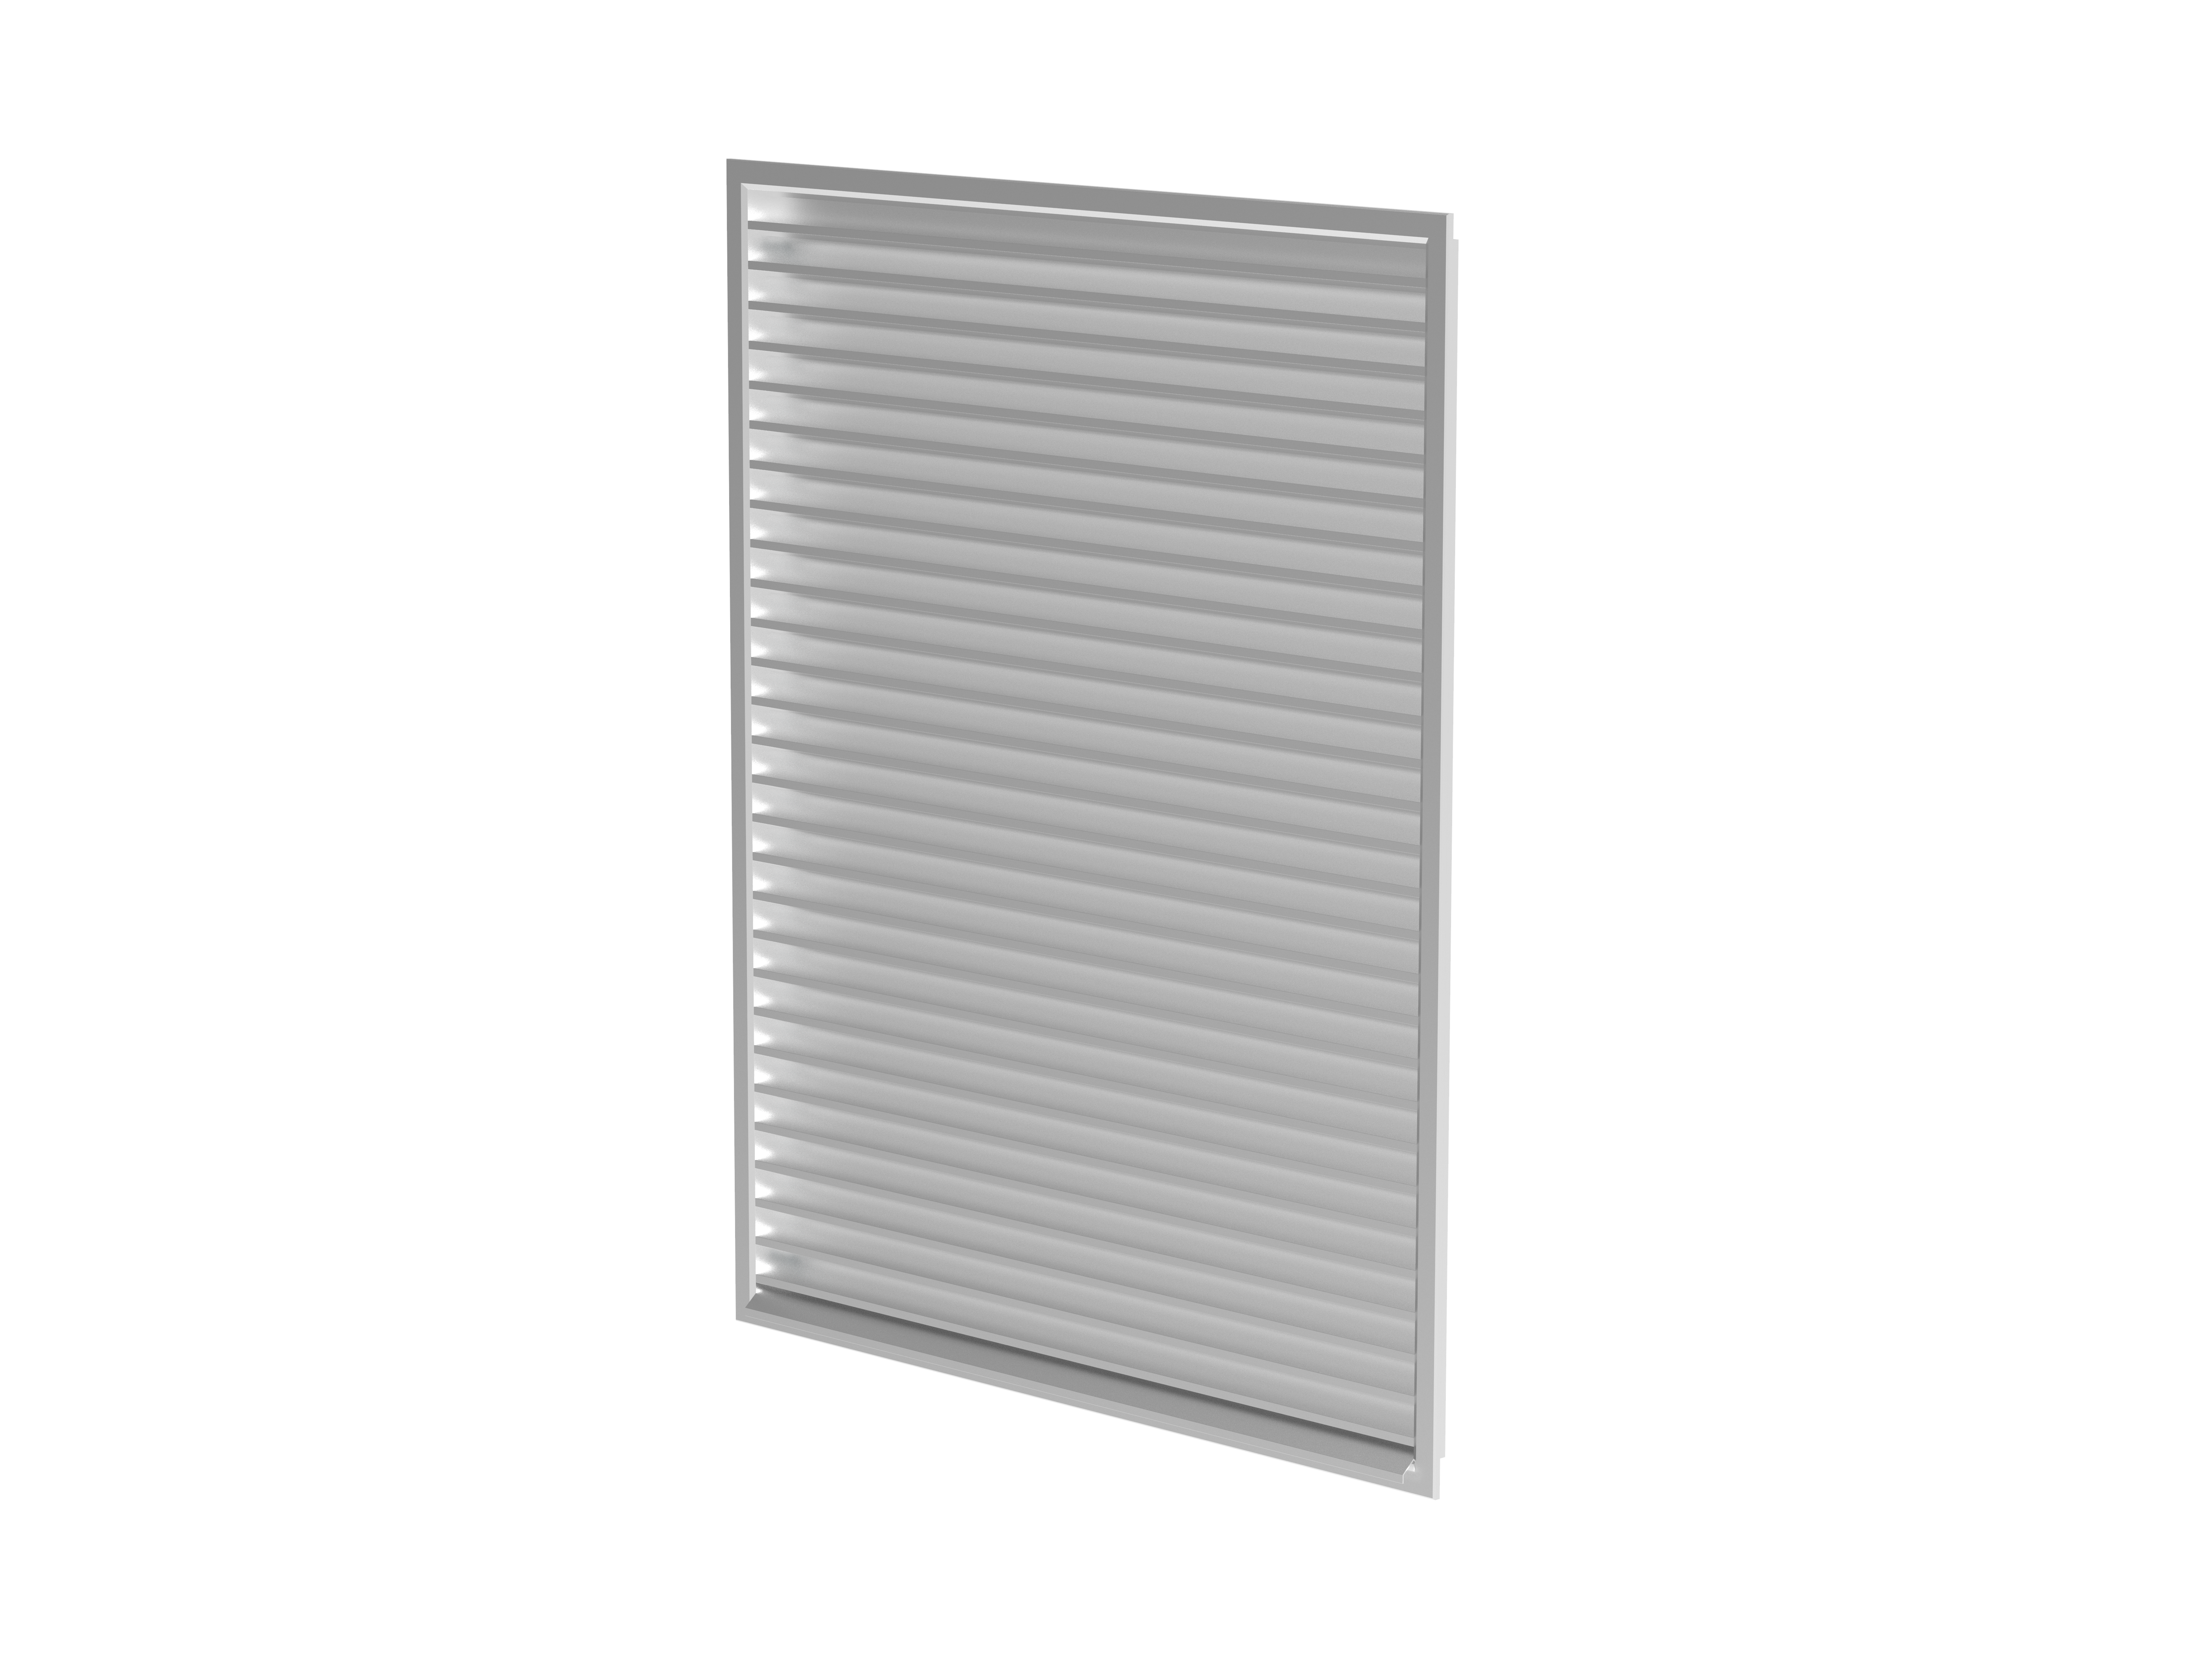 PZAL - Louvres - Air Distribution Products - Ürünler - Systemair